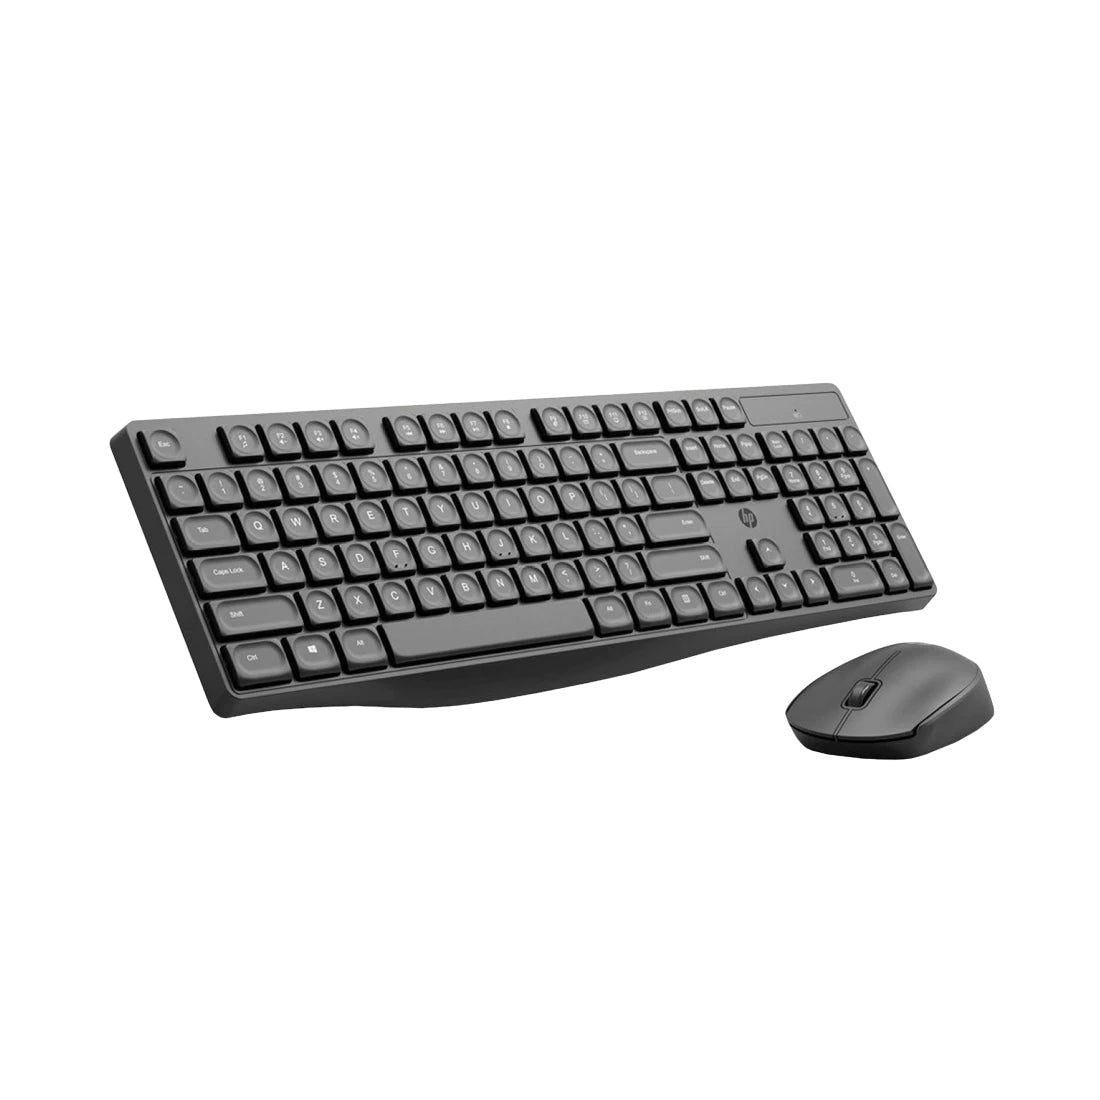 HP CS10 2.4GHz Wireless Keyboard and Optical Mouse Combo with Adjustable DPI